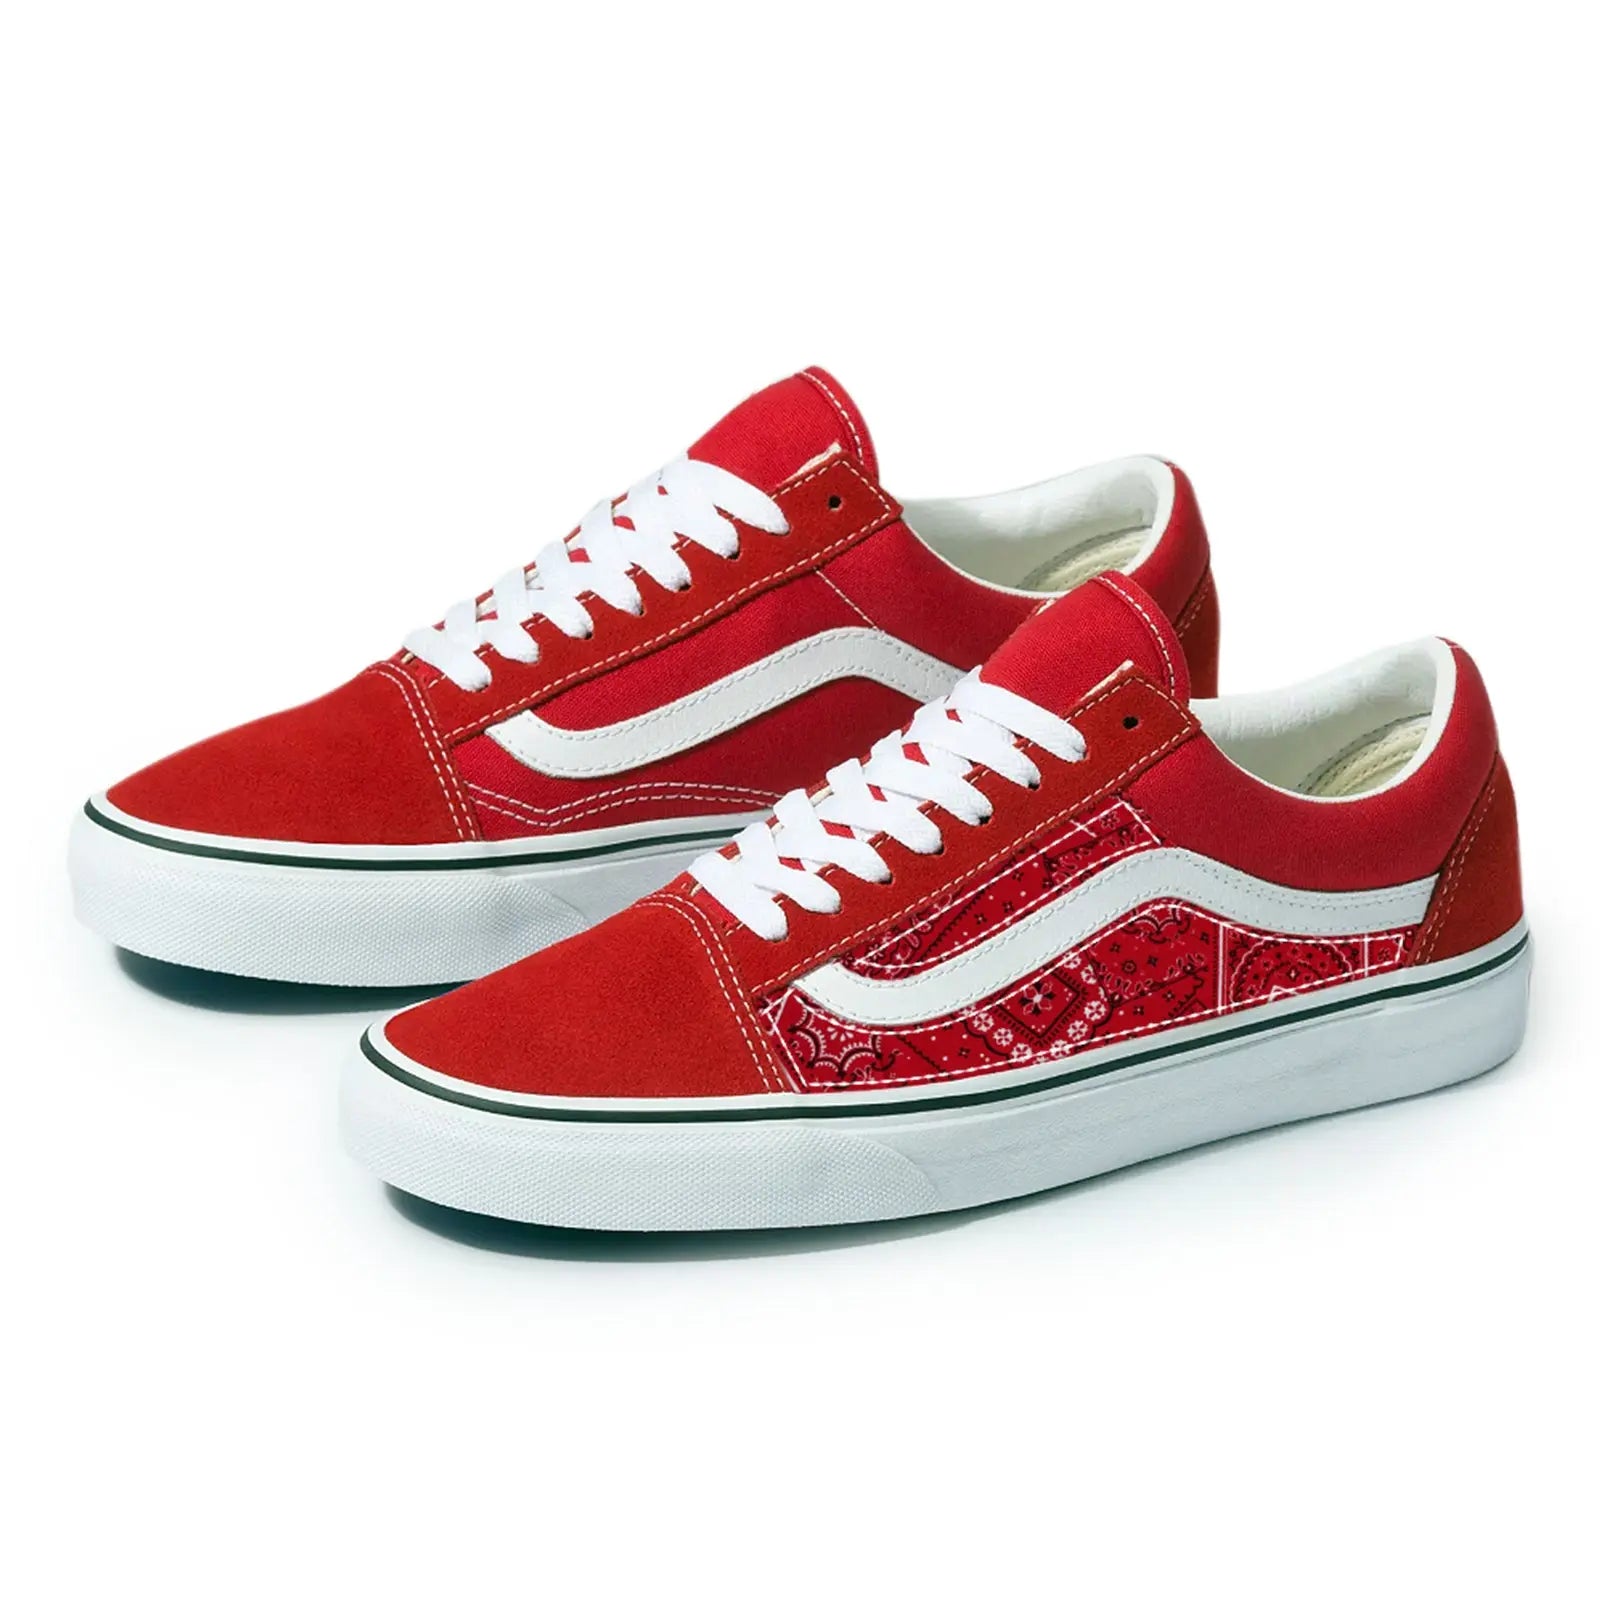 Vans Red Old Skool x Red Bandana Pattern Custom Handmade Shoes By Patch Collection 